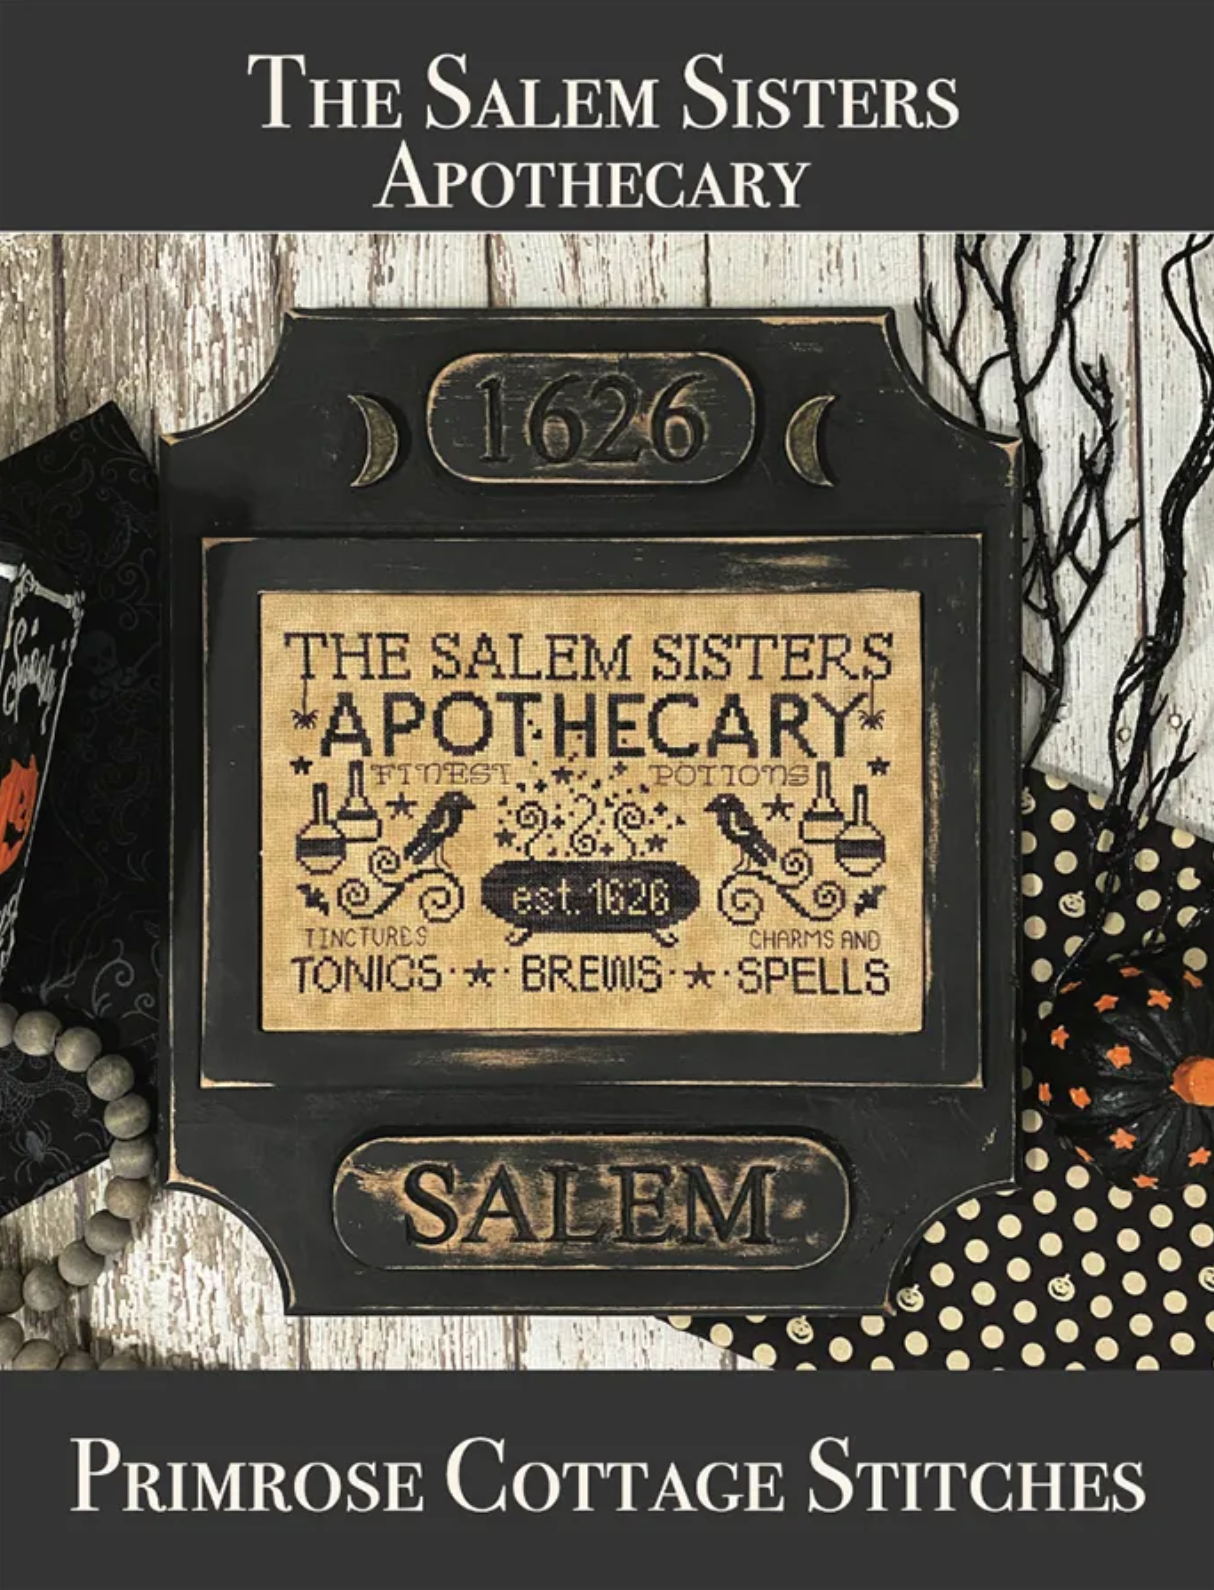 Primrose Cottage Stitches - The Salem Sisters Apothecary